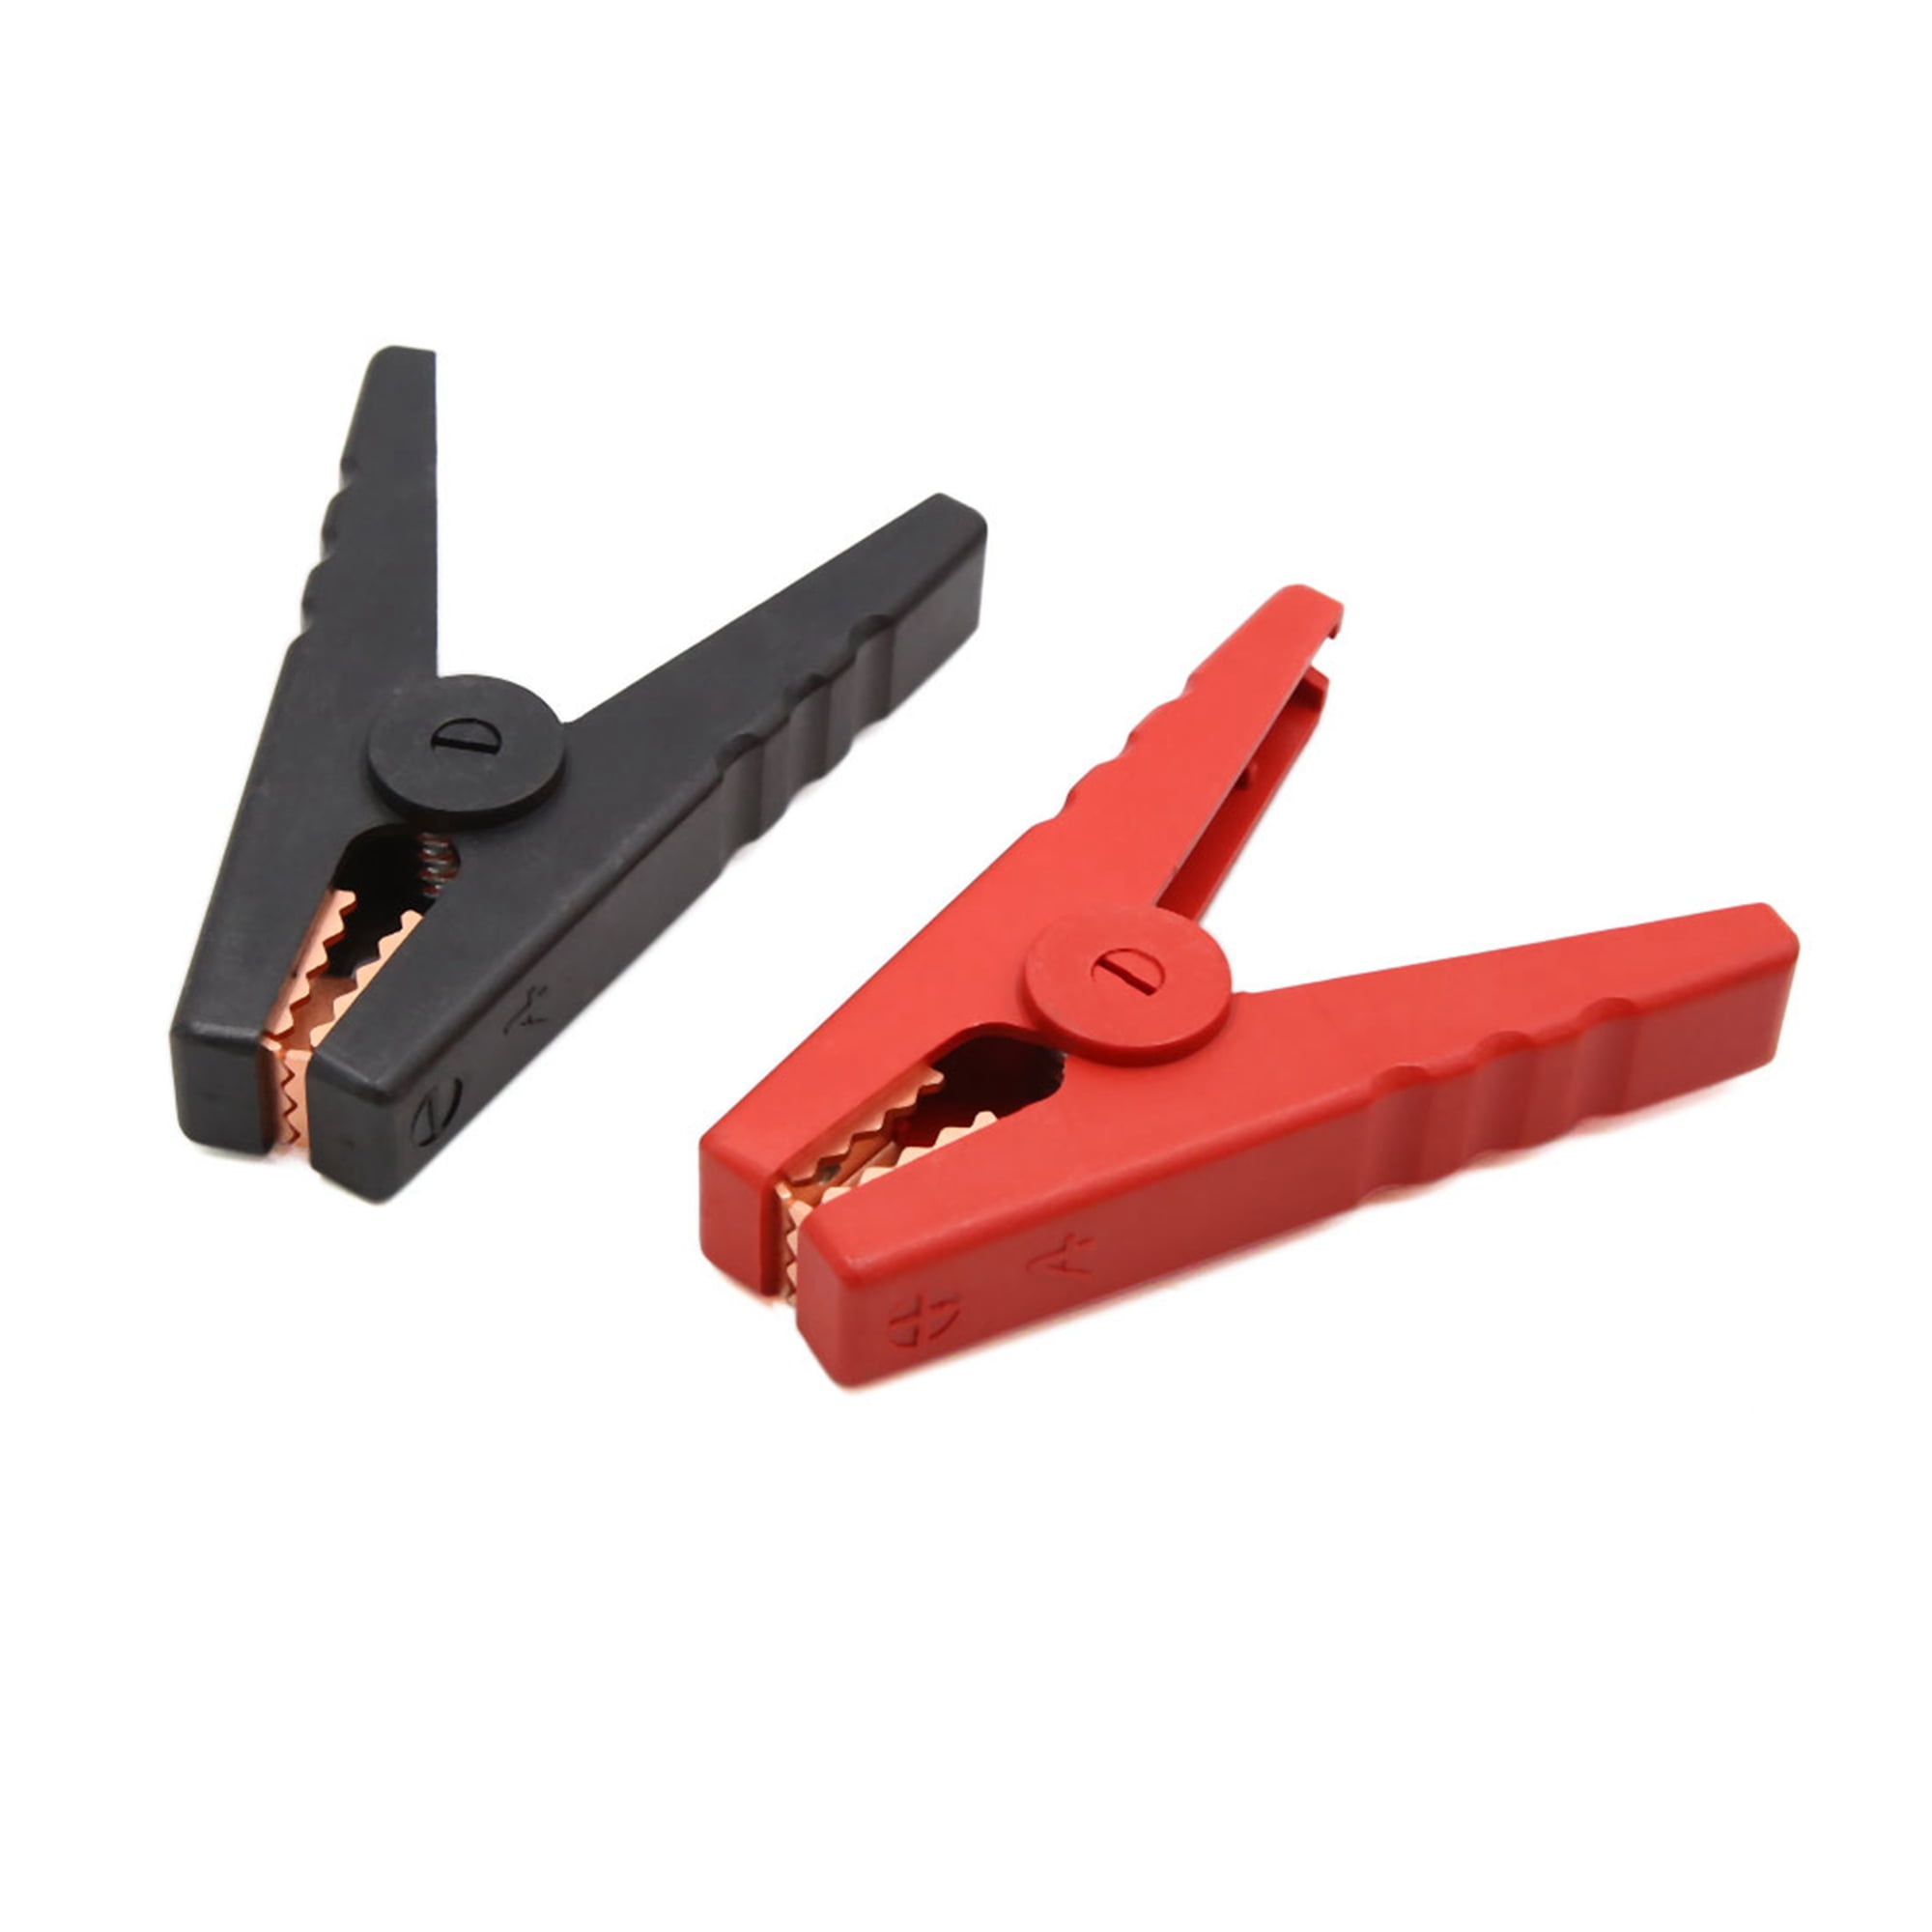 Black Red 100A Insulated Battery Clip Clamp for Car Auto Vehicle Xnrtop 2 Piece 90mm Long Battery Alligator Clips 